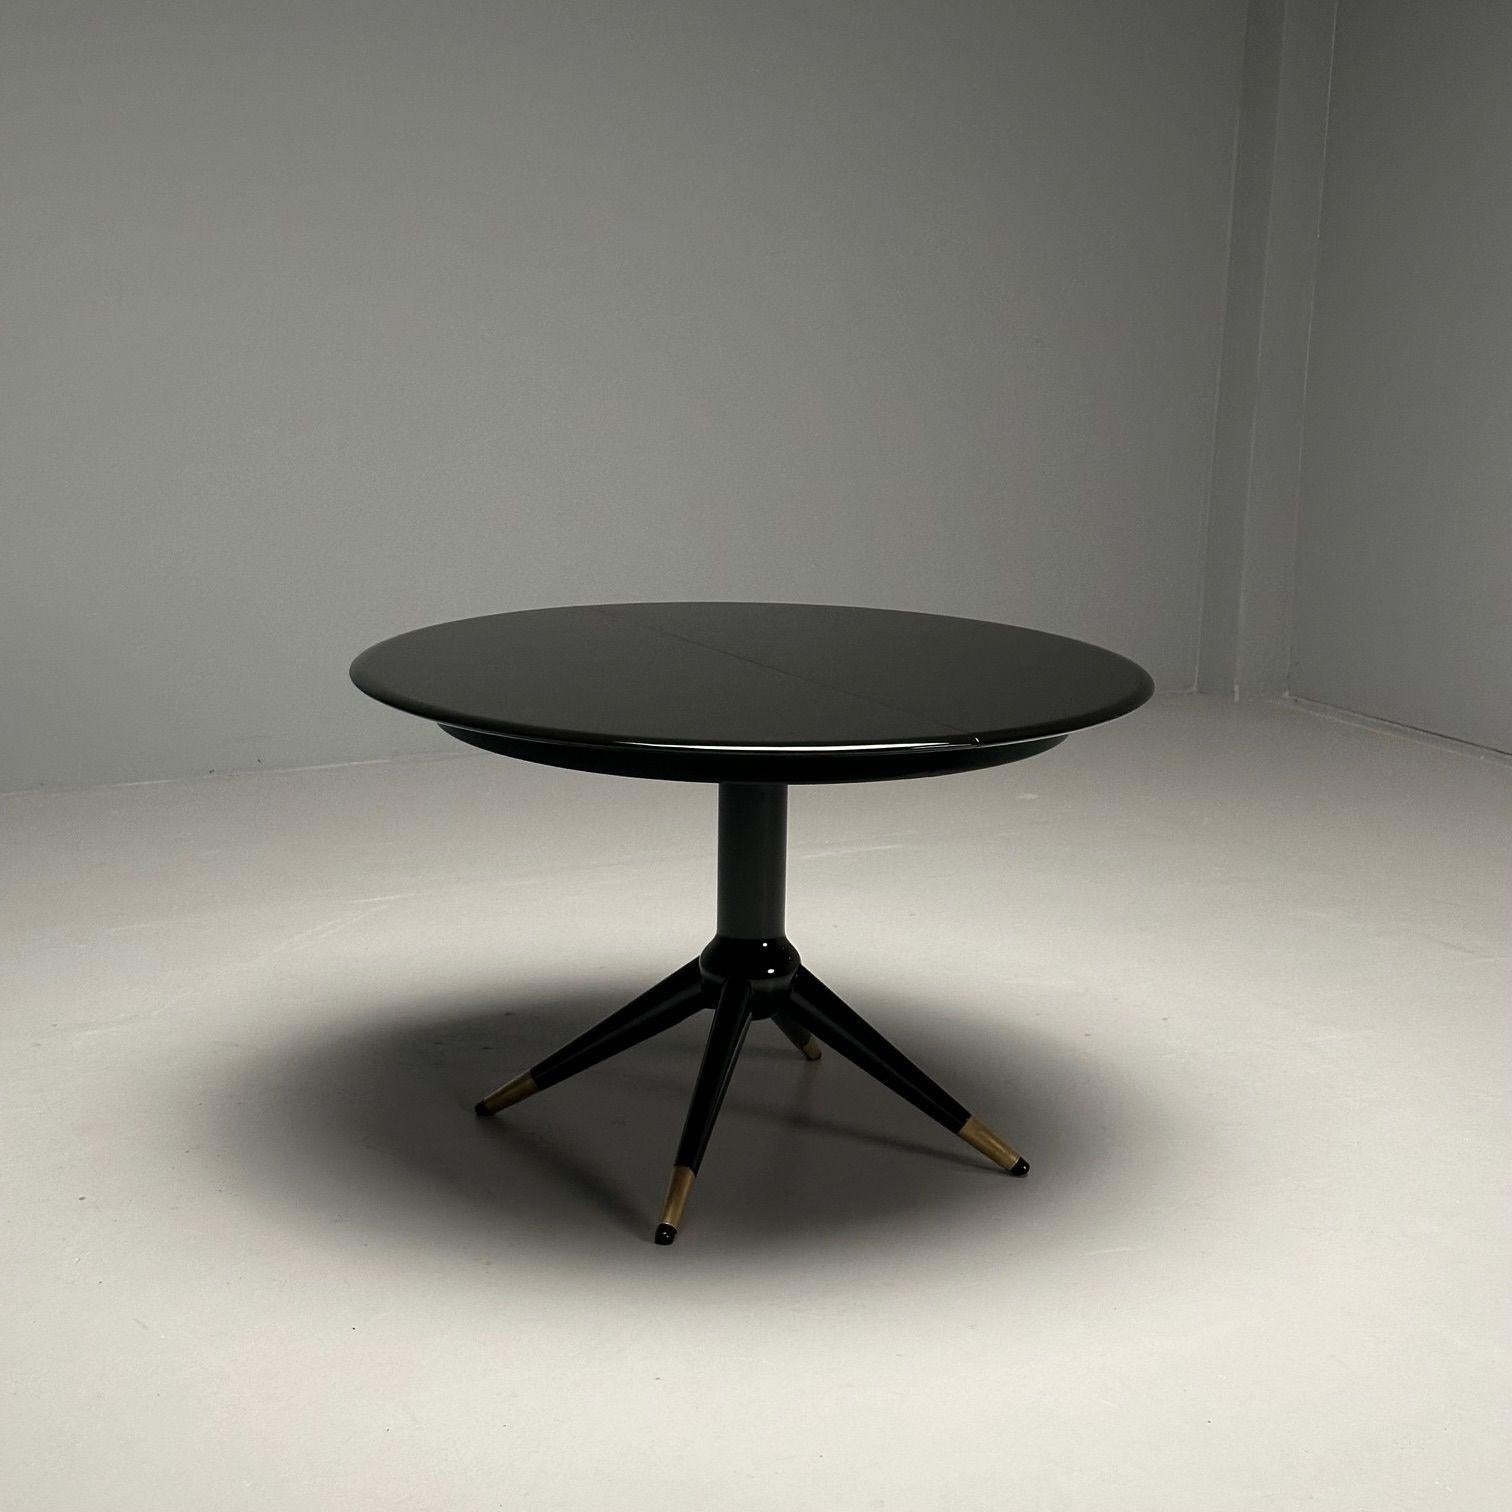 Brass Melchiorre Bega, Italian Mid-Century Modern, Dining Table, Table, Black Lacquer For Sale